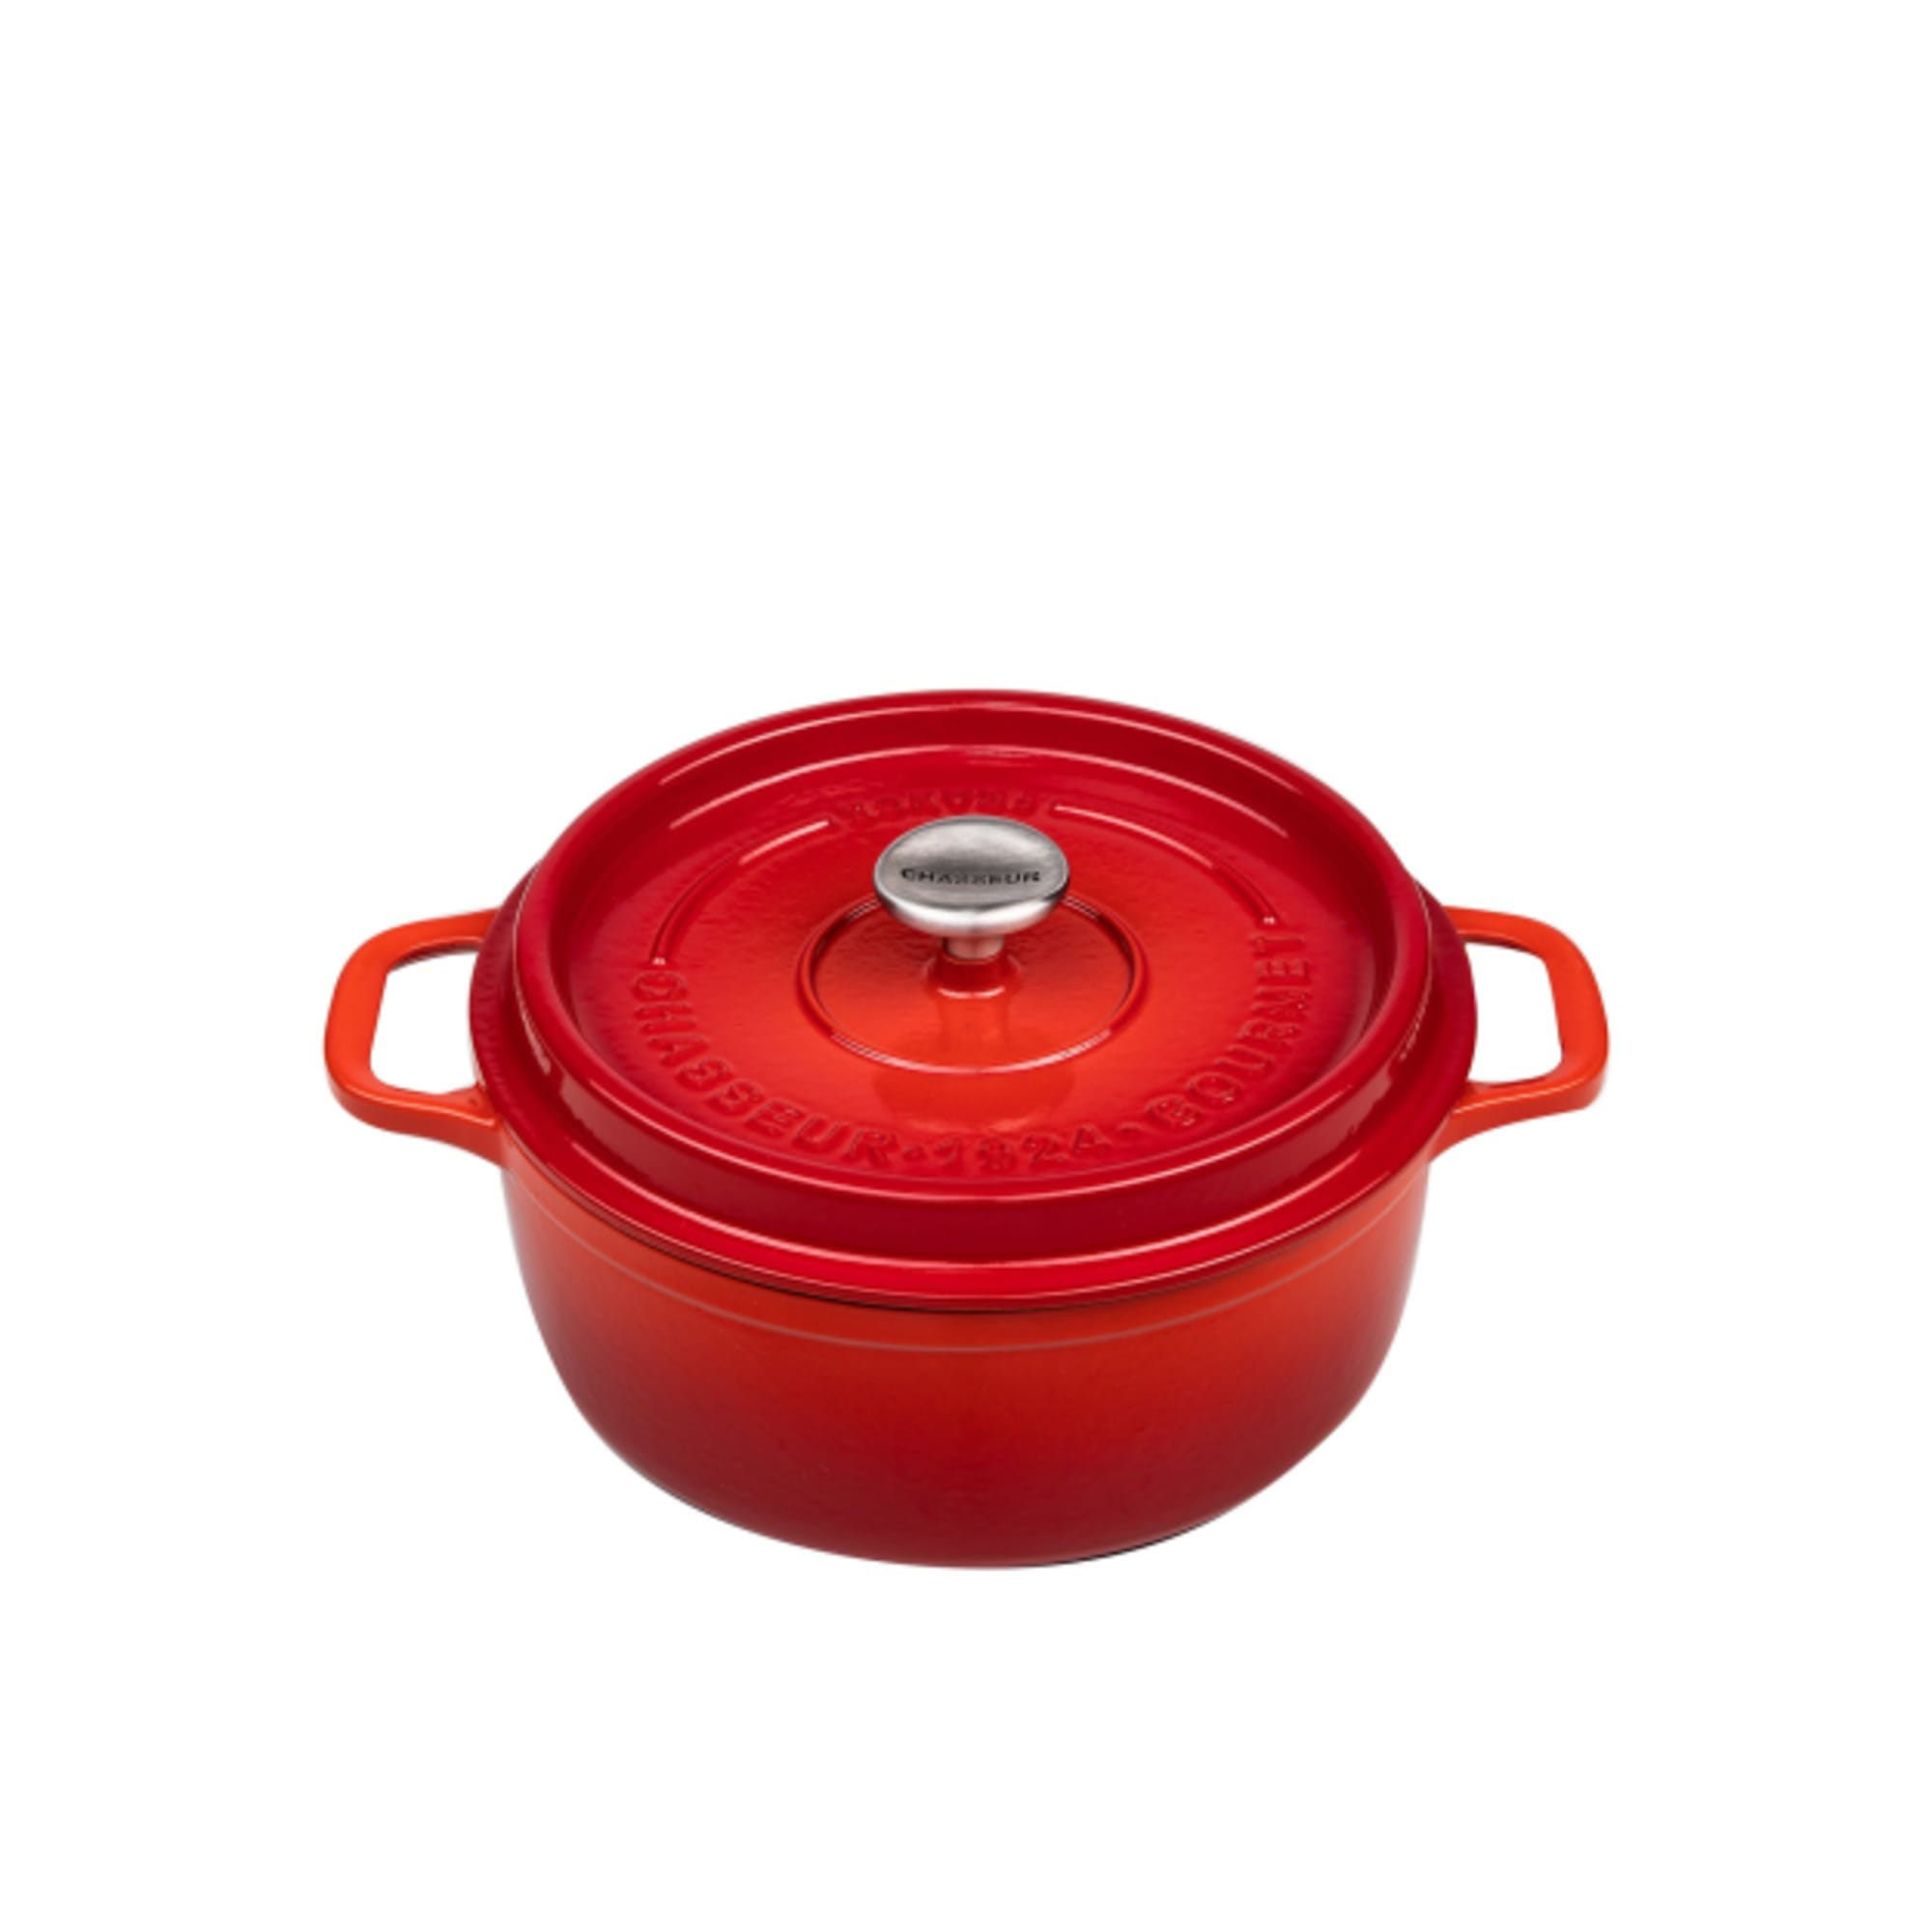 Enameled Refined Iron Dutch Oven With Lid 4.7L Nonstick Braised